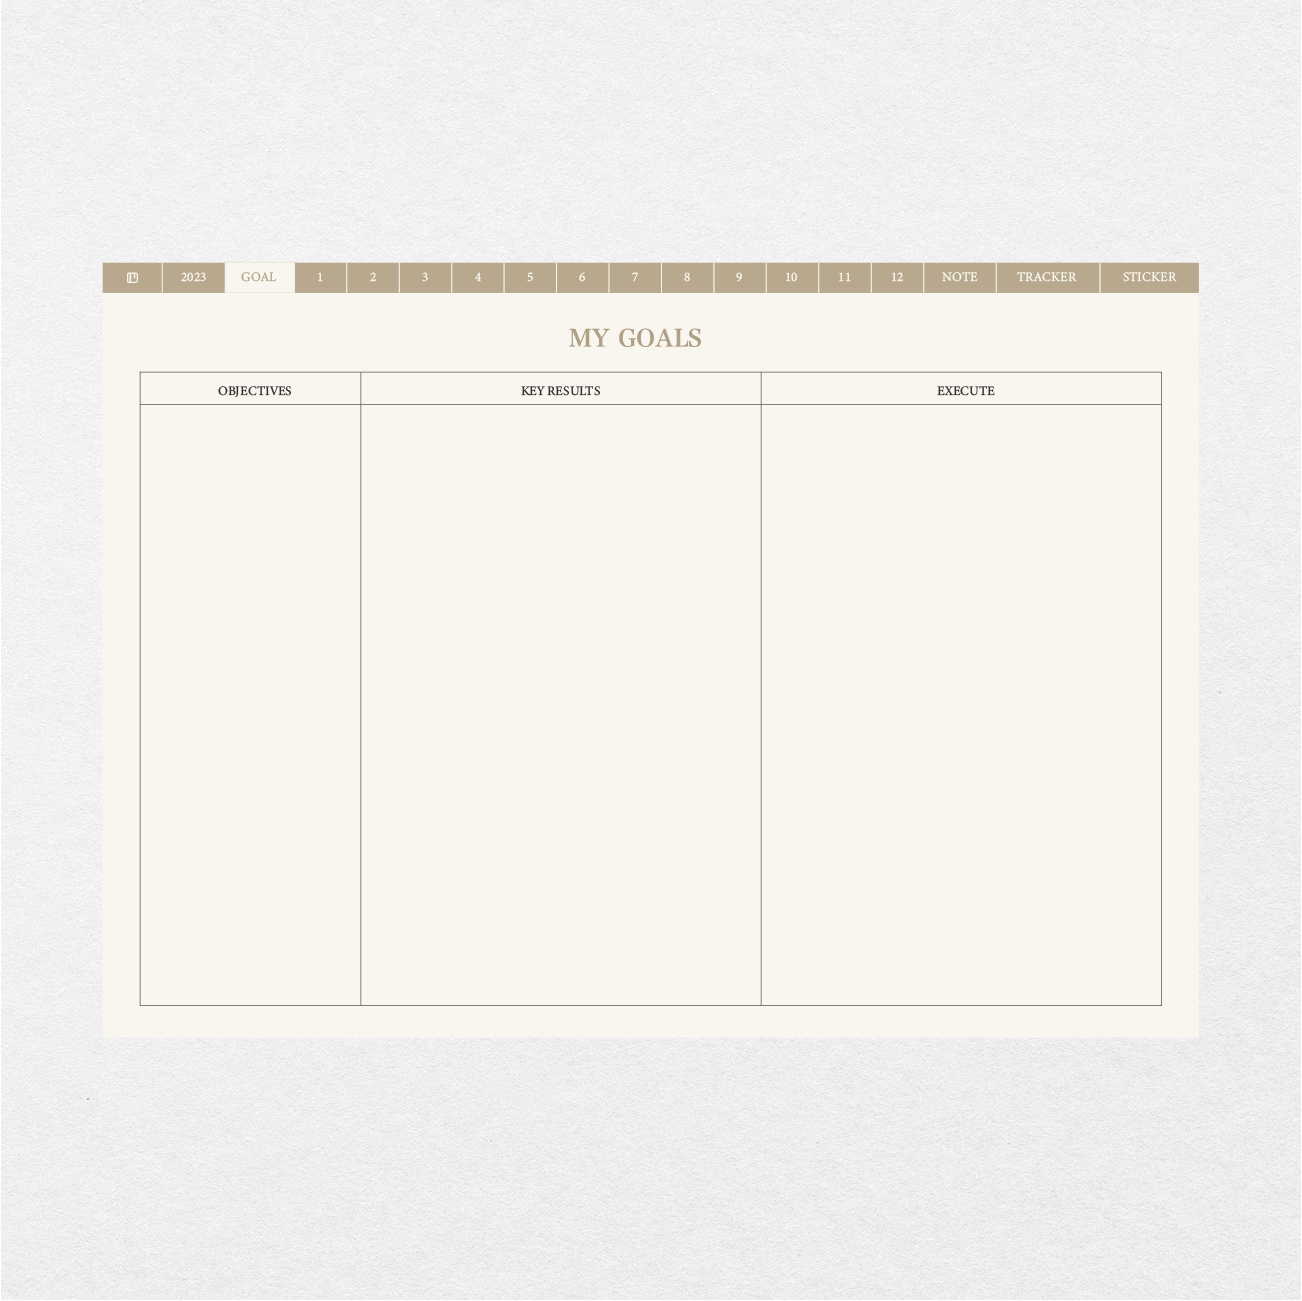 Digital 2023 Journal and Planner - Stationery Pal